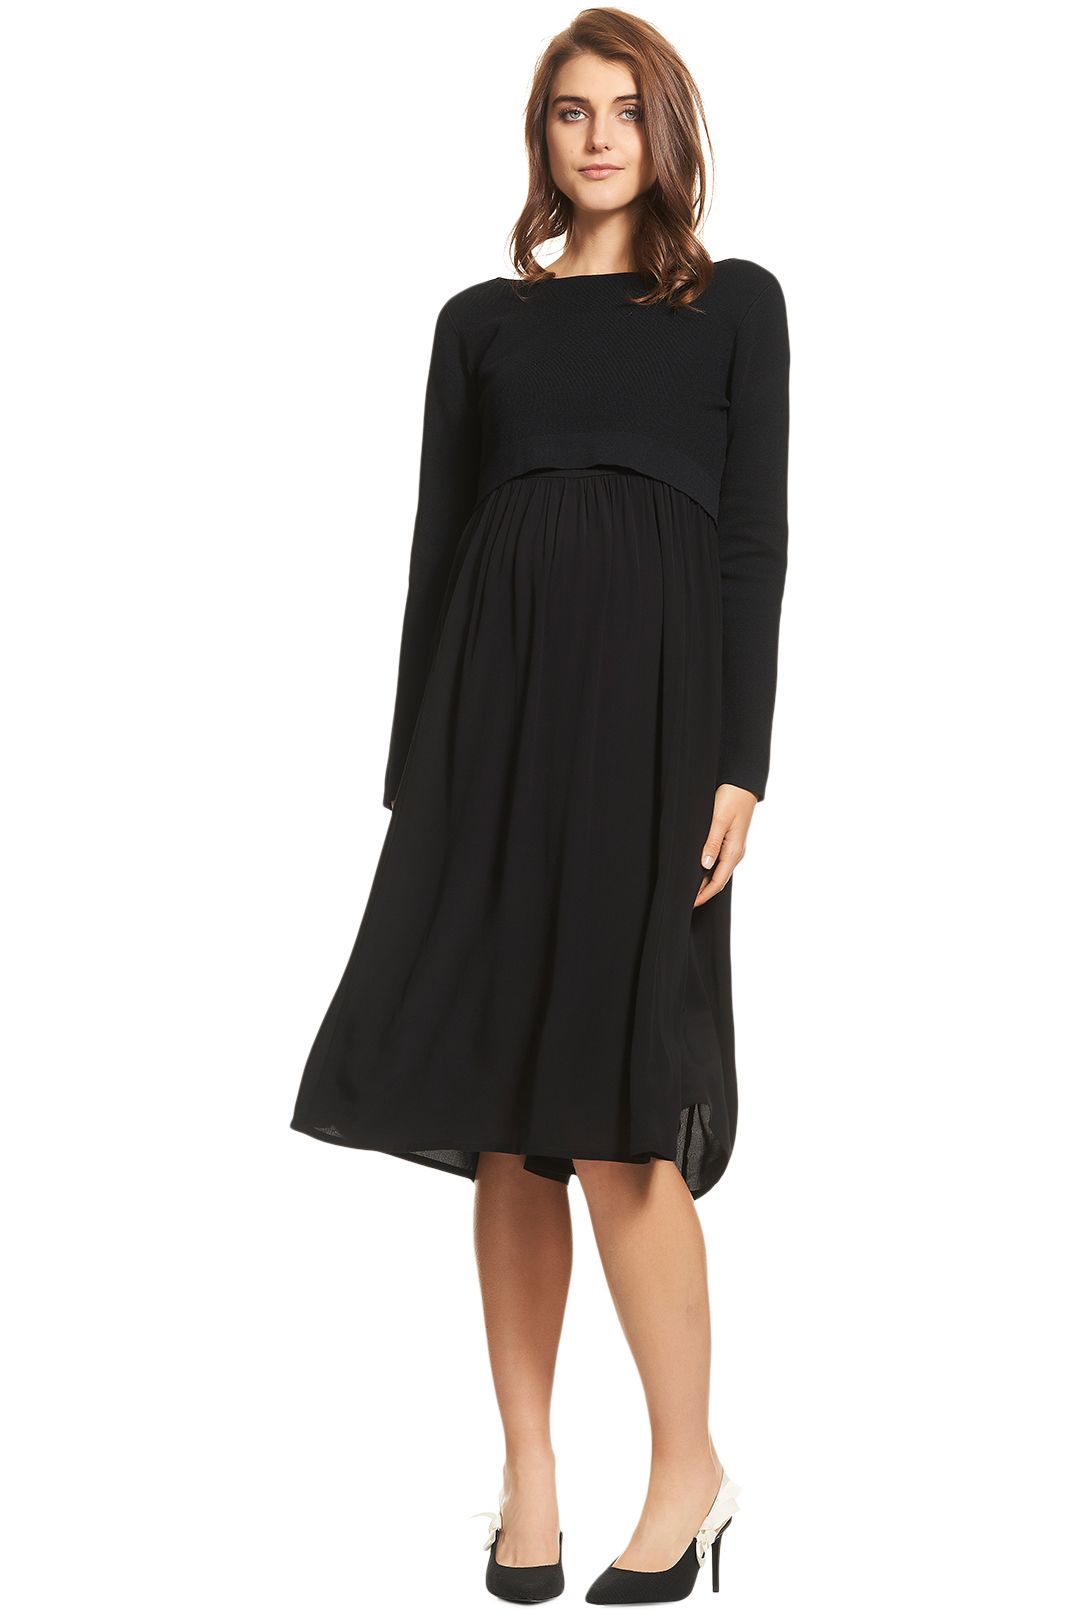 Soon-Maternity-Francis-Long-Sleeve-Dress-Navy-Speck-Front